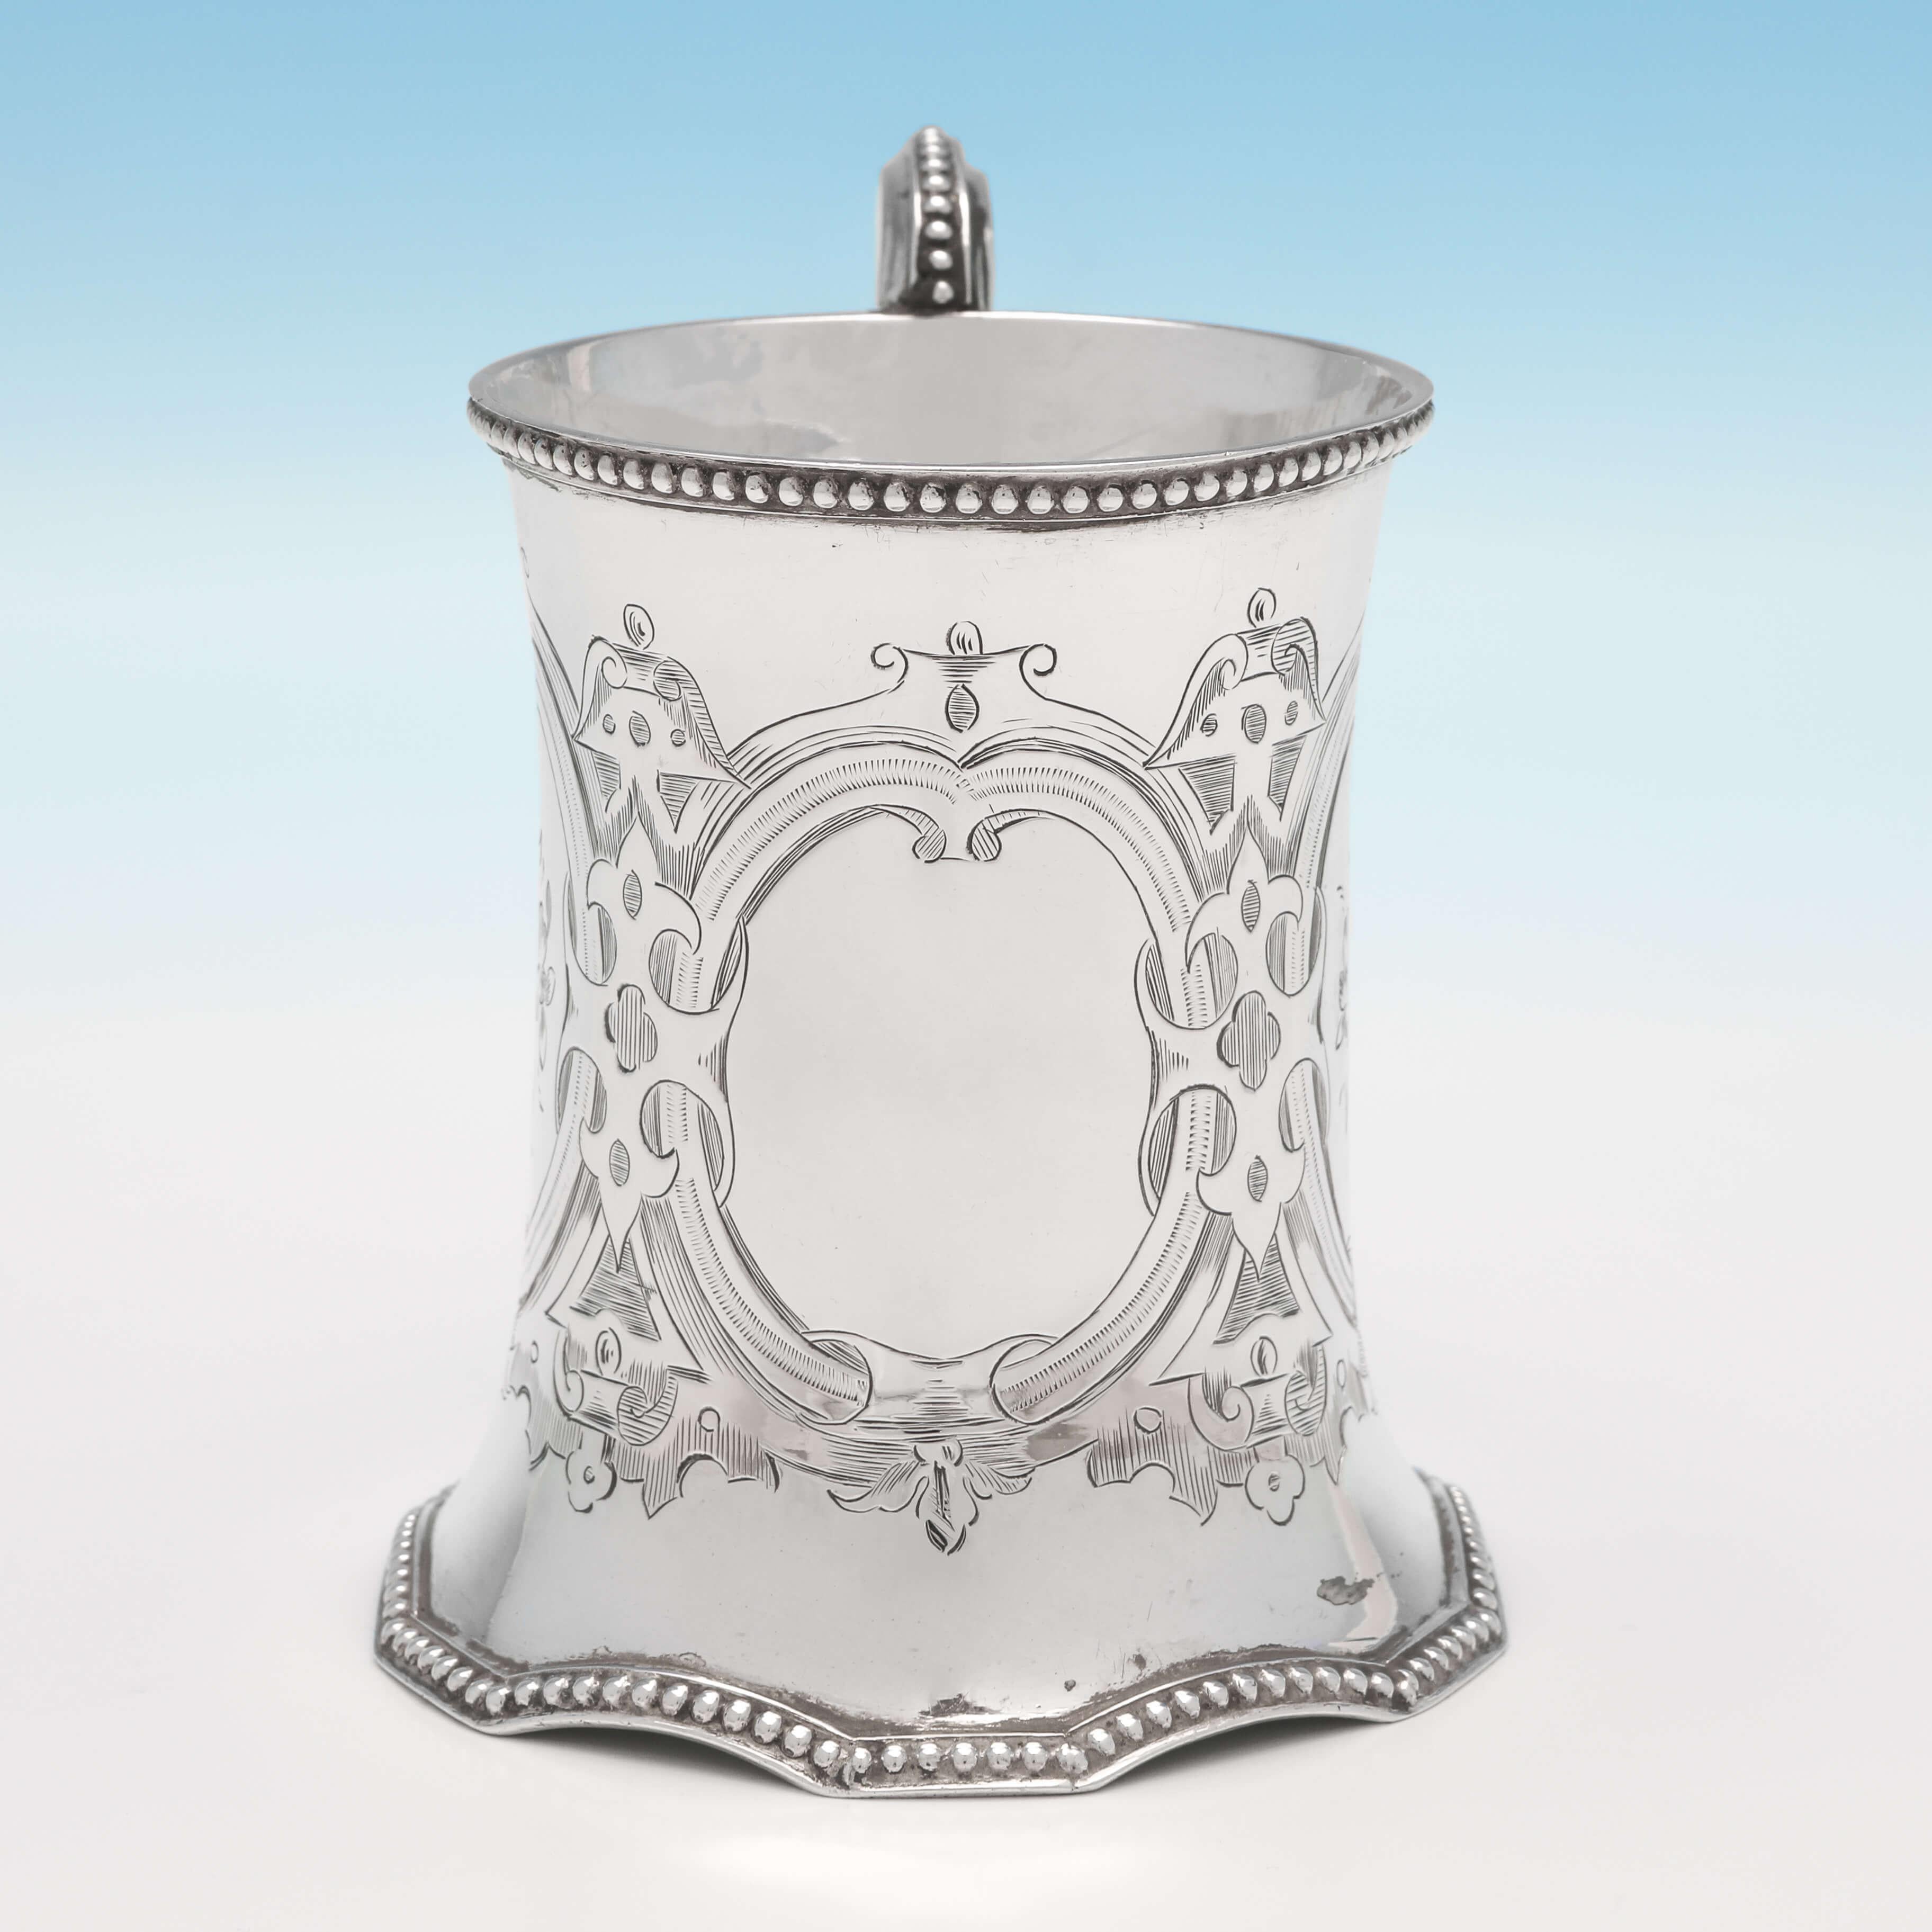 Hallmarked in London in 1858 by Robert Hennell II, this attractive, Victorian, antique sterling silver Christening mug, features bright cut engraved decoration throughout, bead borders and an unusual shaped base. The christening mug measures: 4